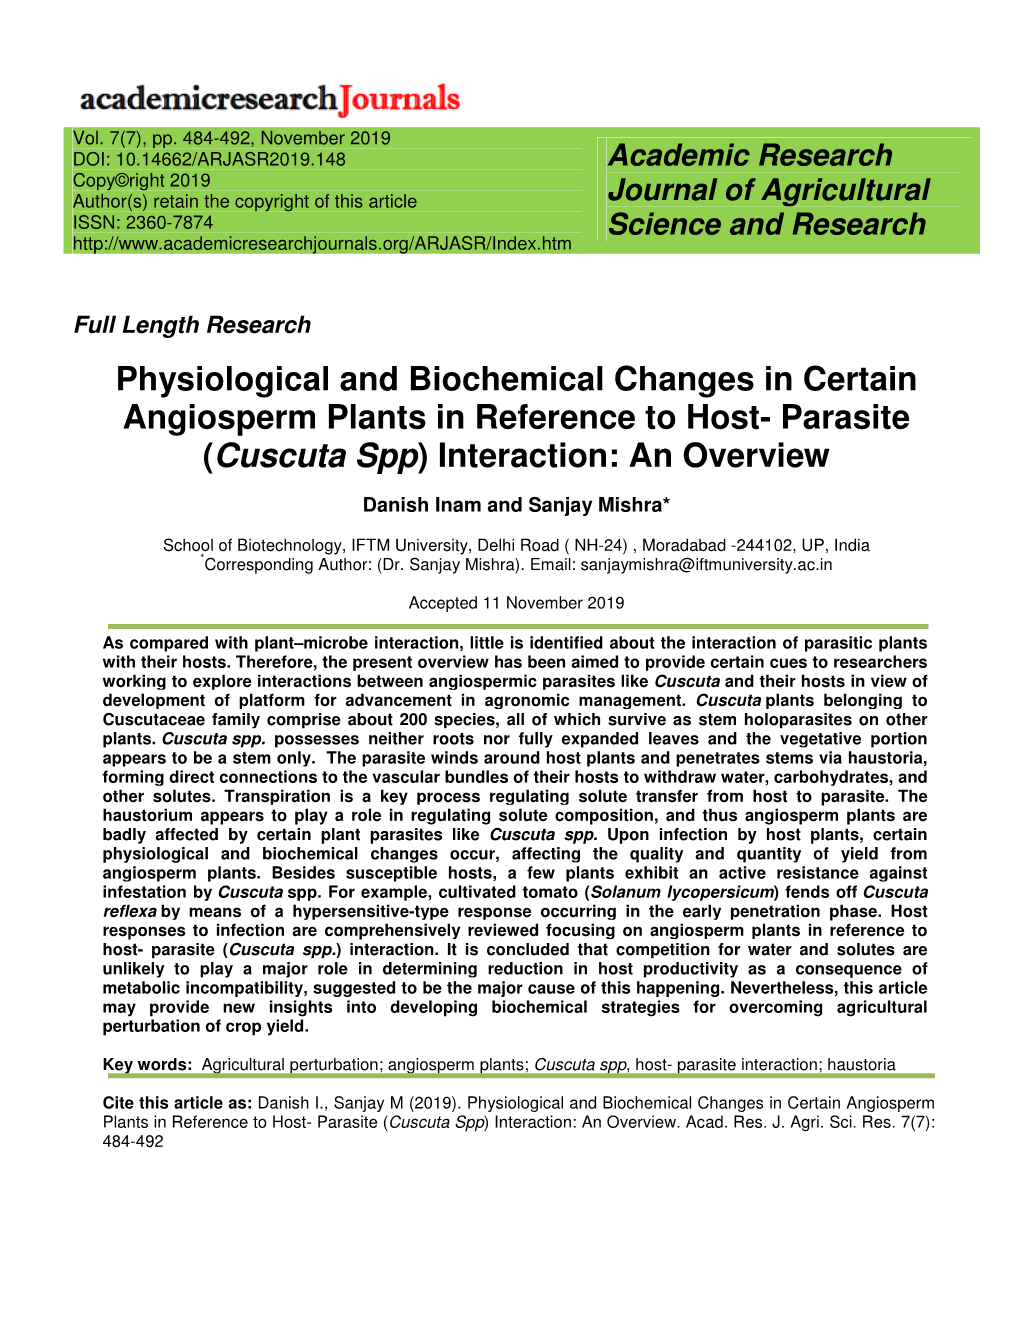 Physiological and Biochemical Changes in Certain Angiosperm Plants in Reference to Host- Parasite (Cuscuta Spp ) Interaction: an Overview